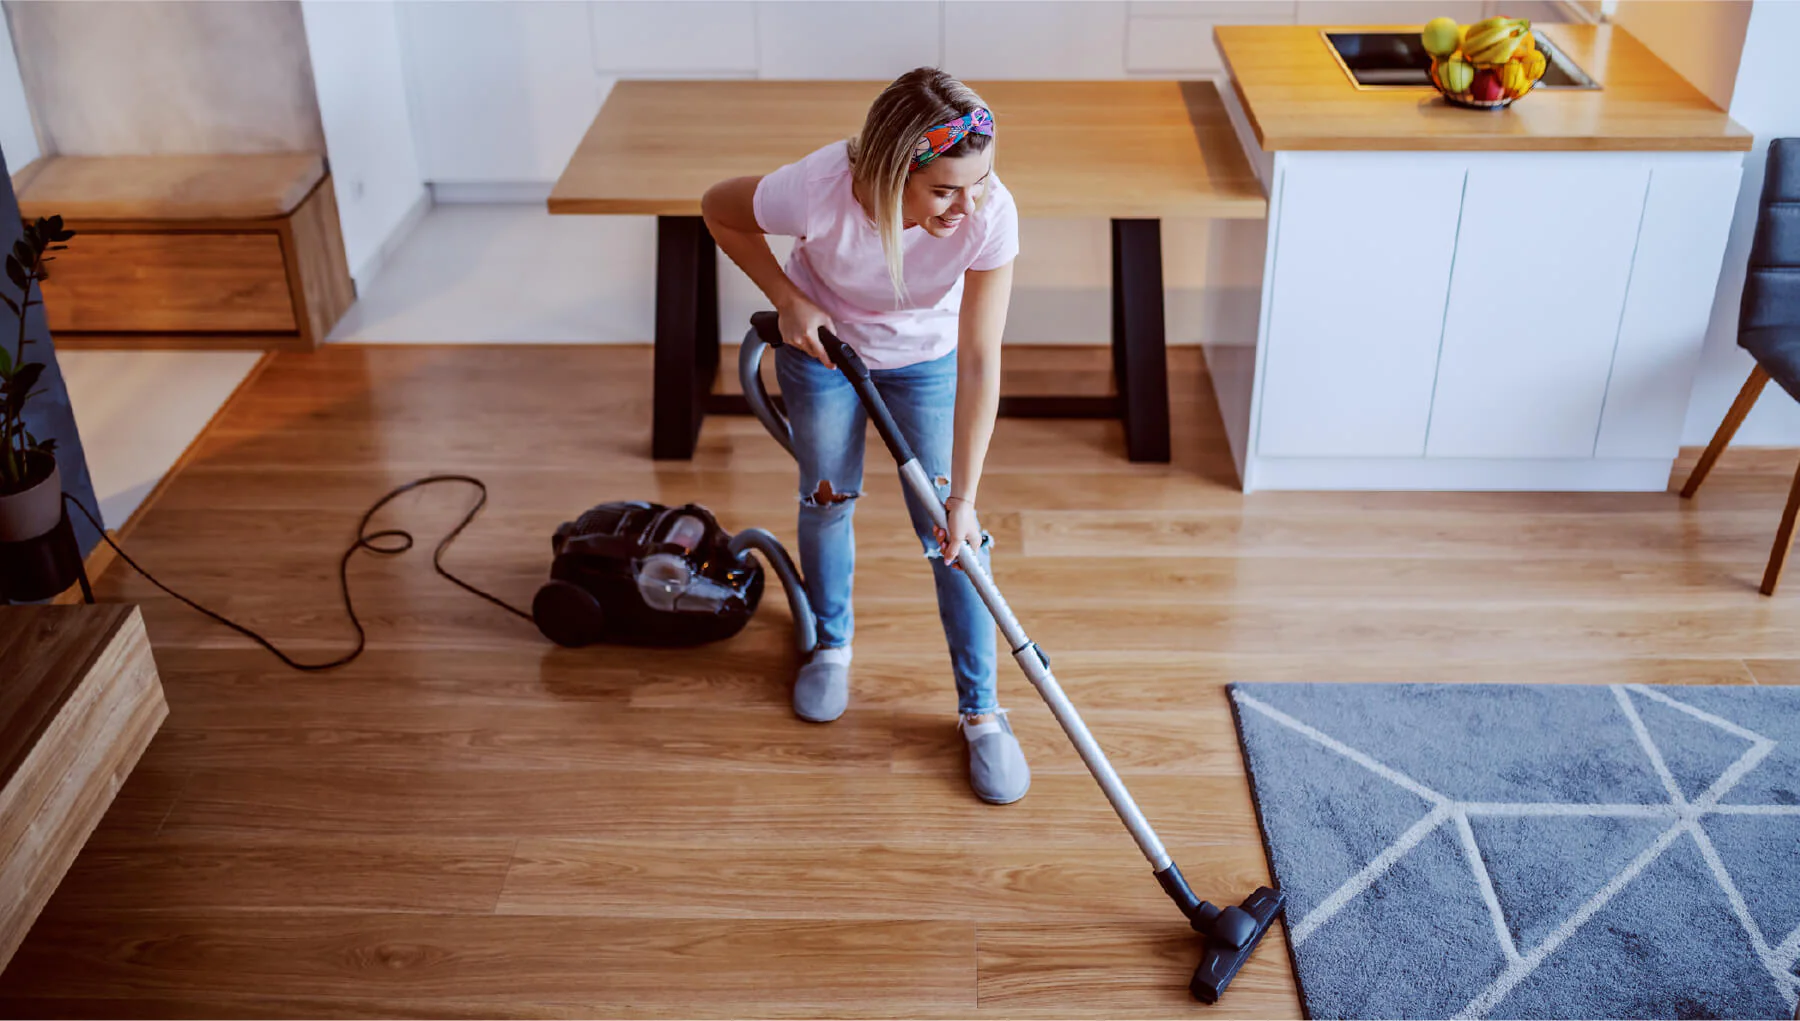 Can You Use a Carpet Cleaner on Vinyl Floors